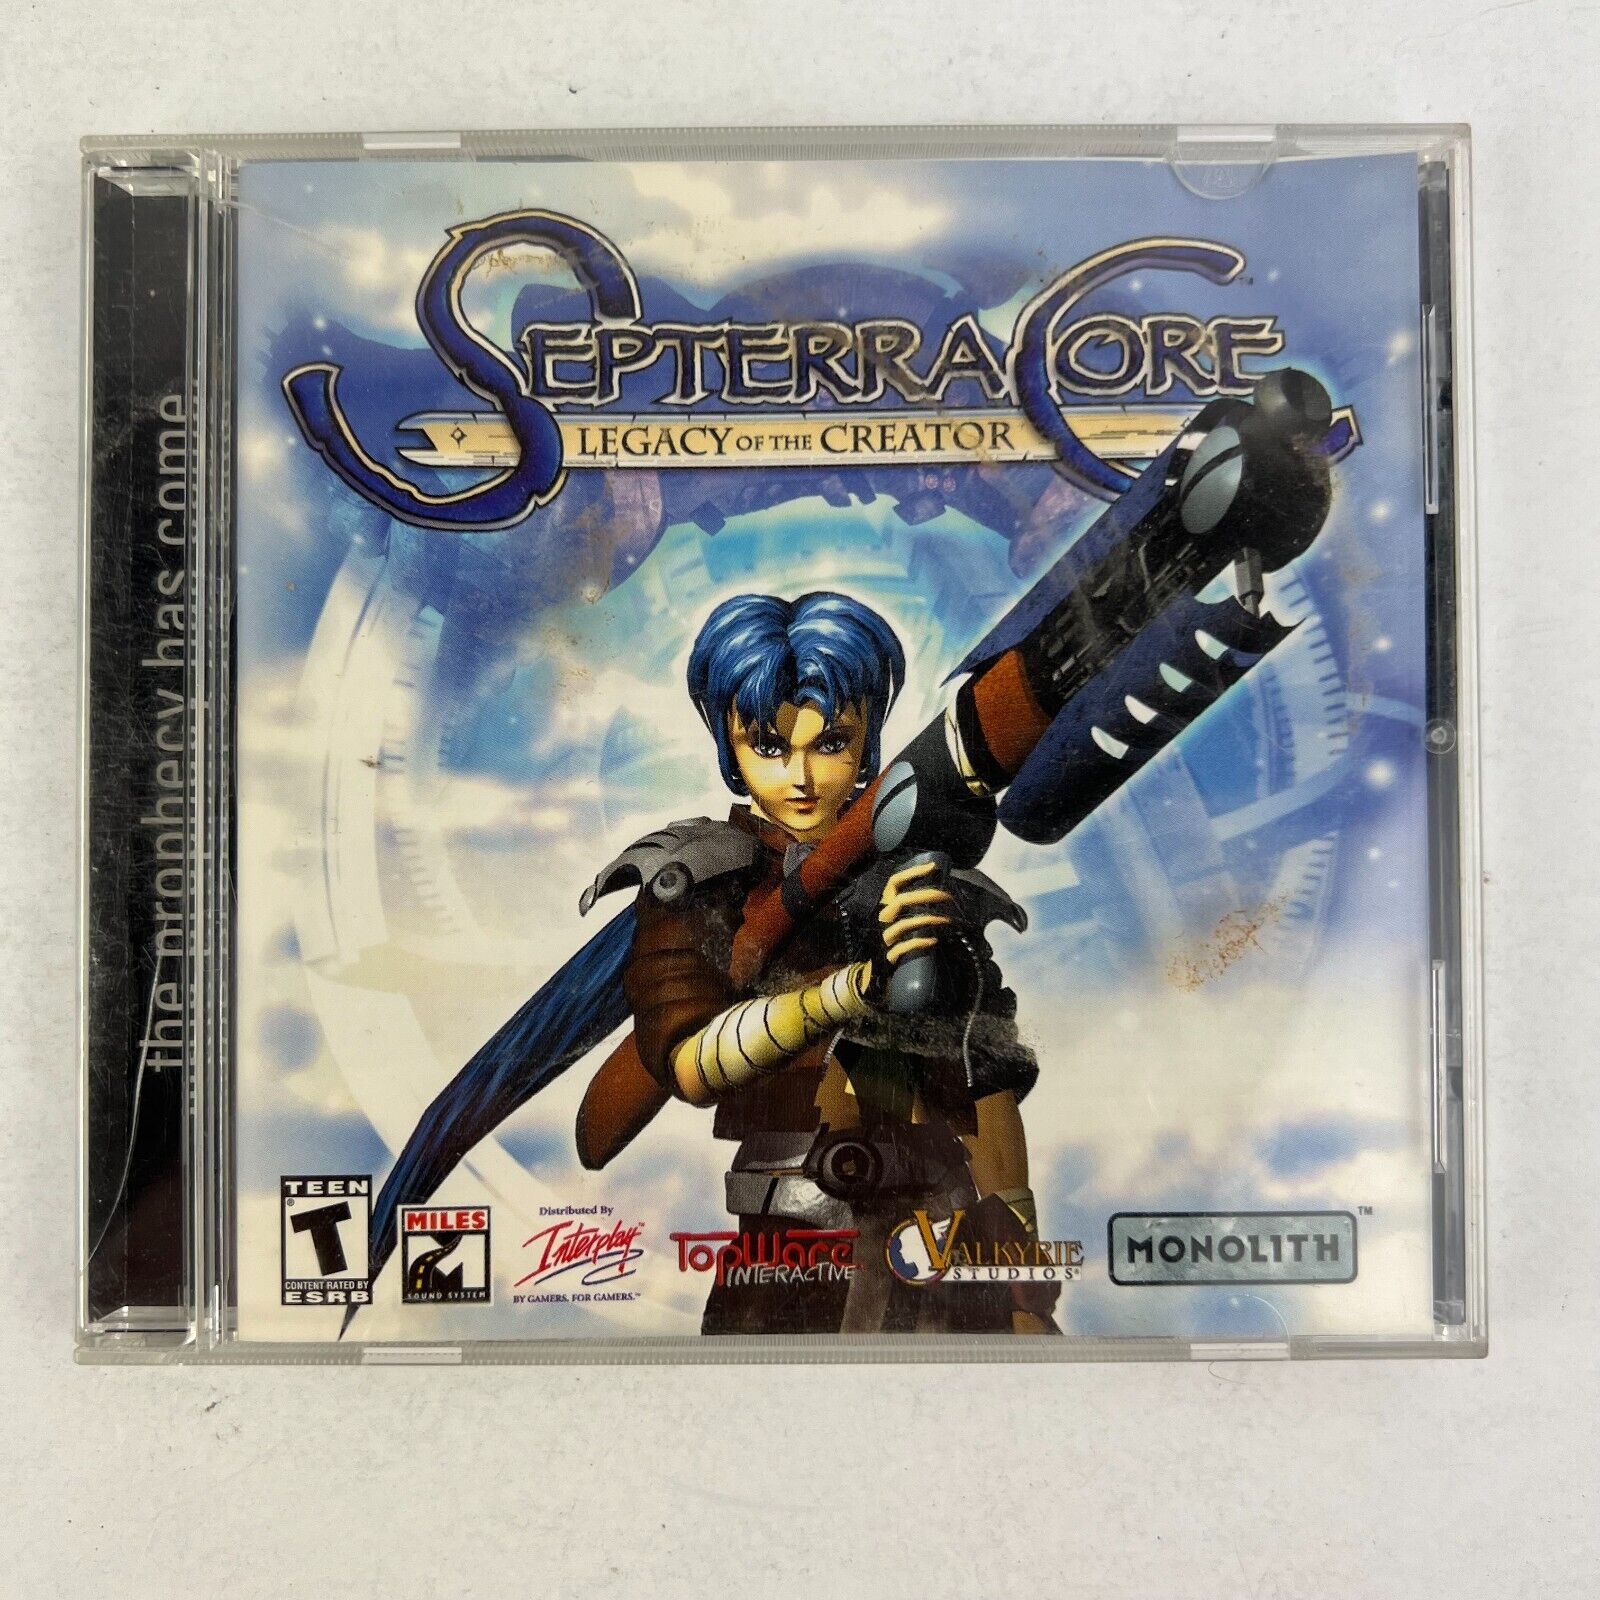 Septerra Core: Legacy of the Creator (PC, 1999)